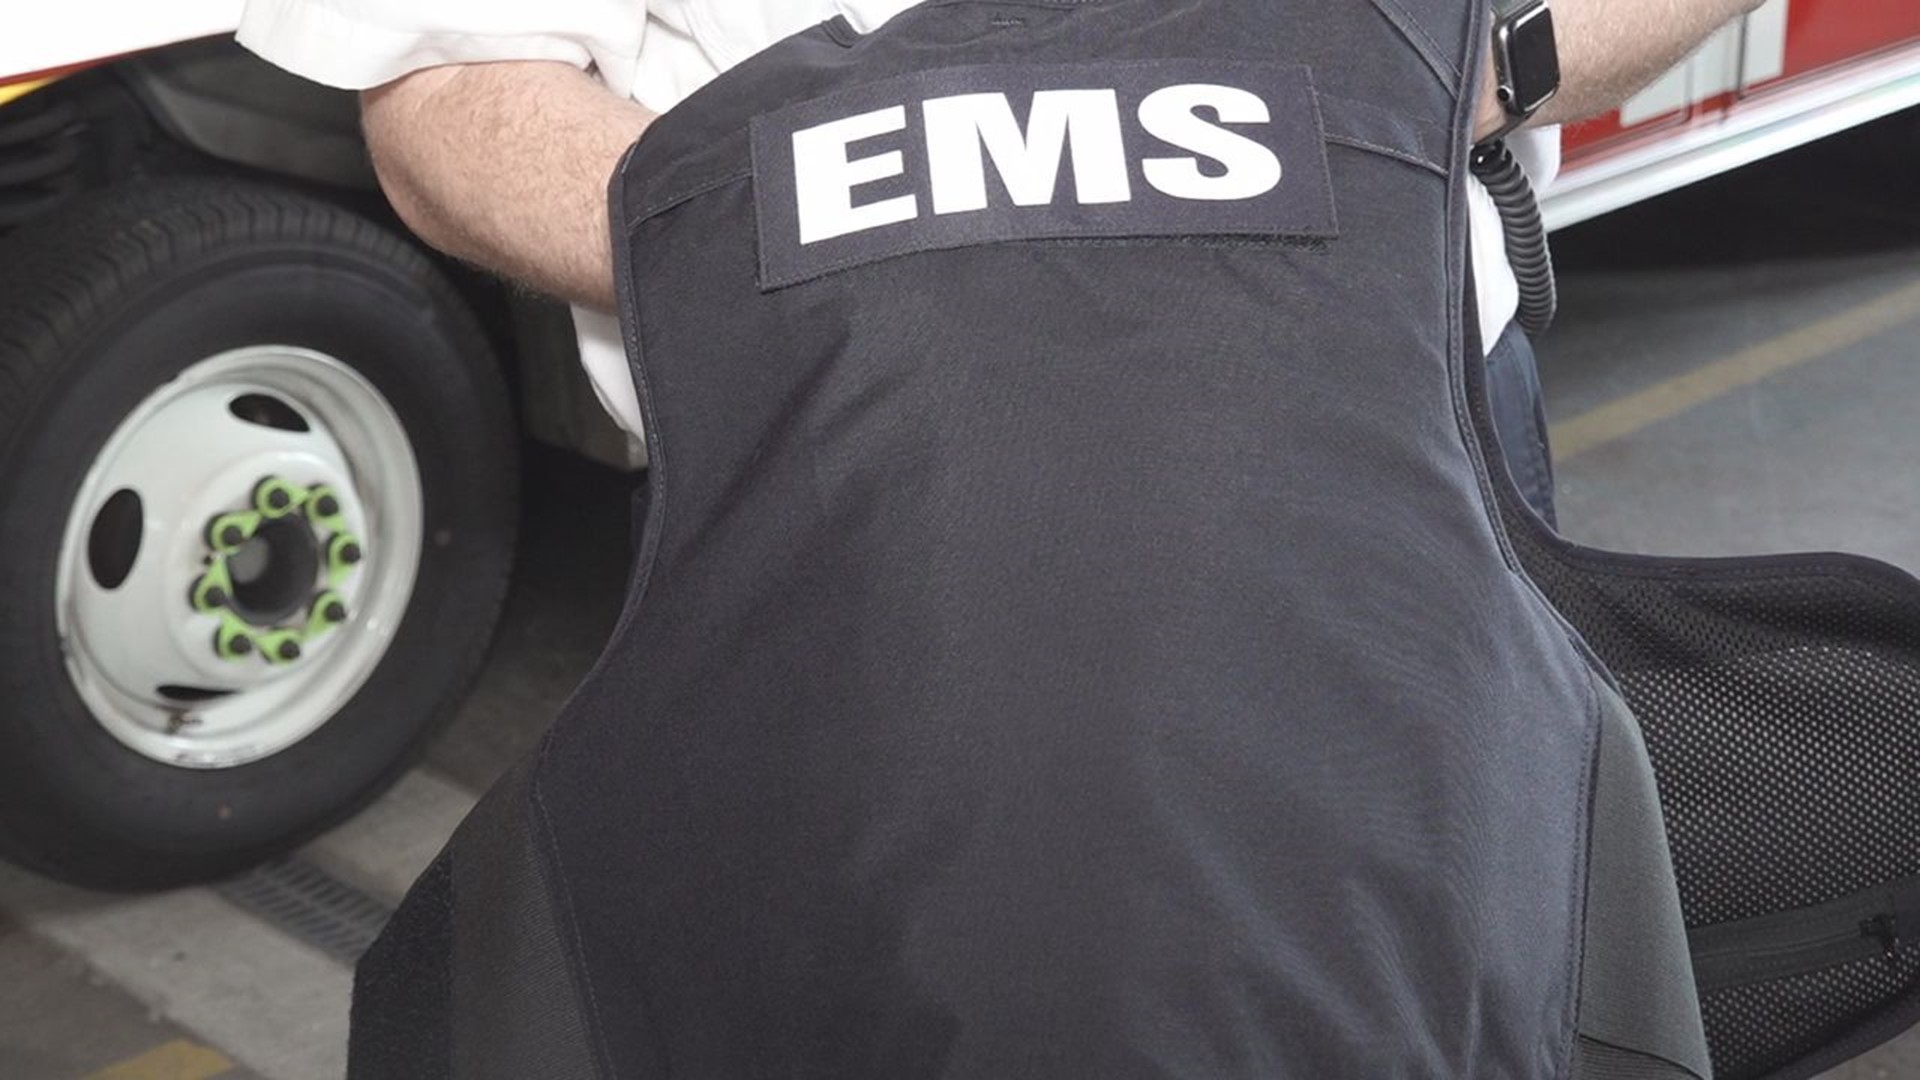 Nearly 50 bulletproof vests were recently delivered to Cumberland Goodwill EMS, paid for by a $49,000 grant.